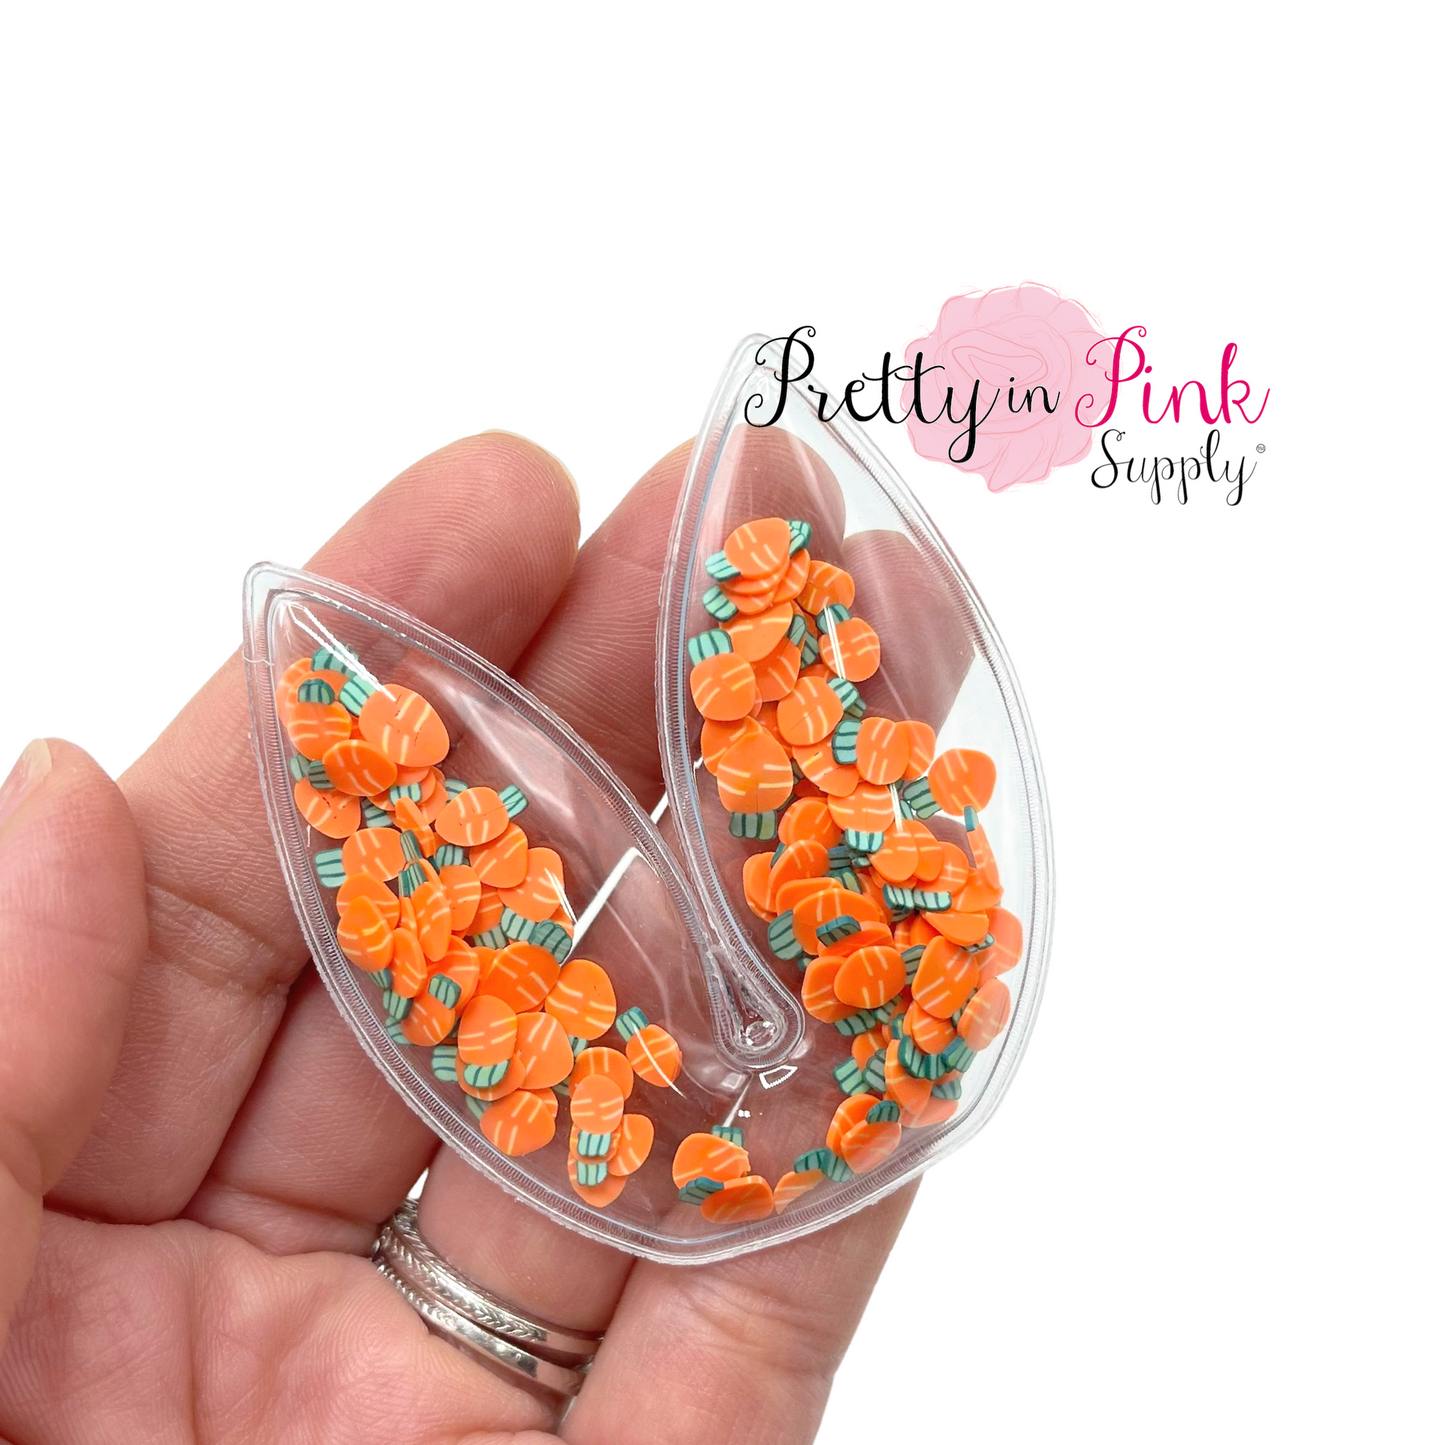 Inflated Bunny Ears | Confetti Shakers - Pretty in Pink Supply